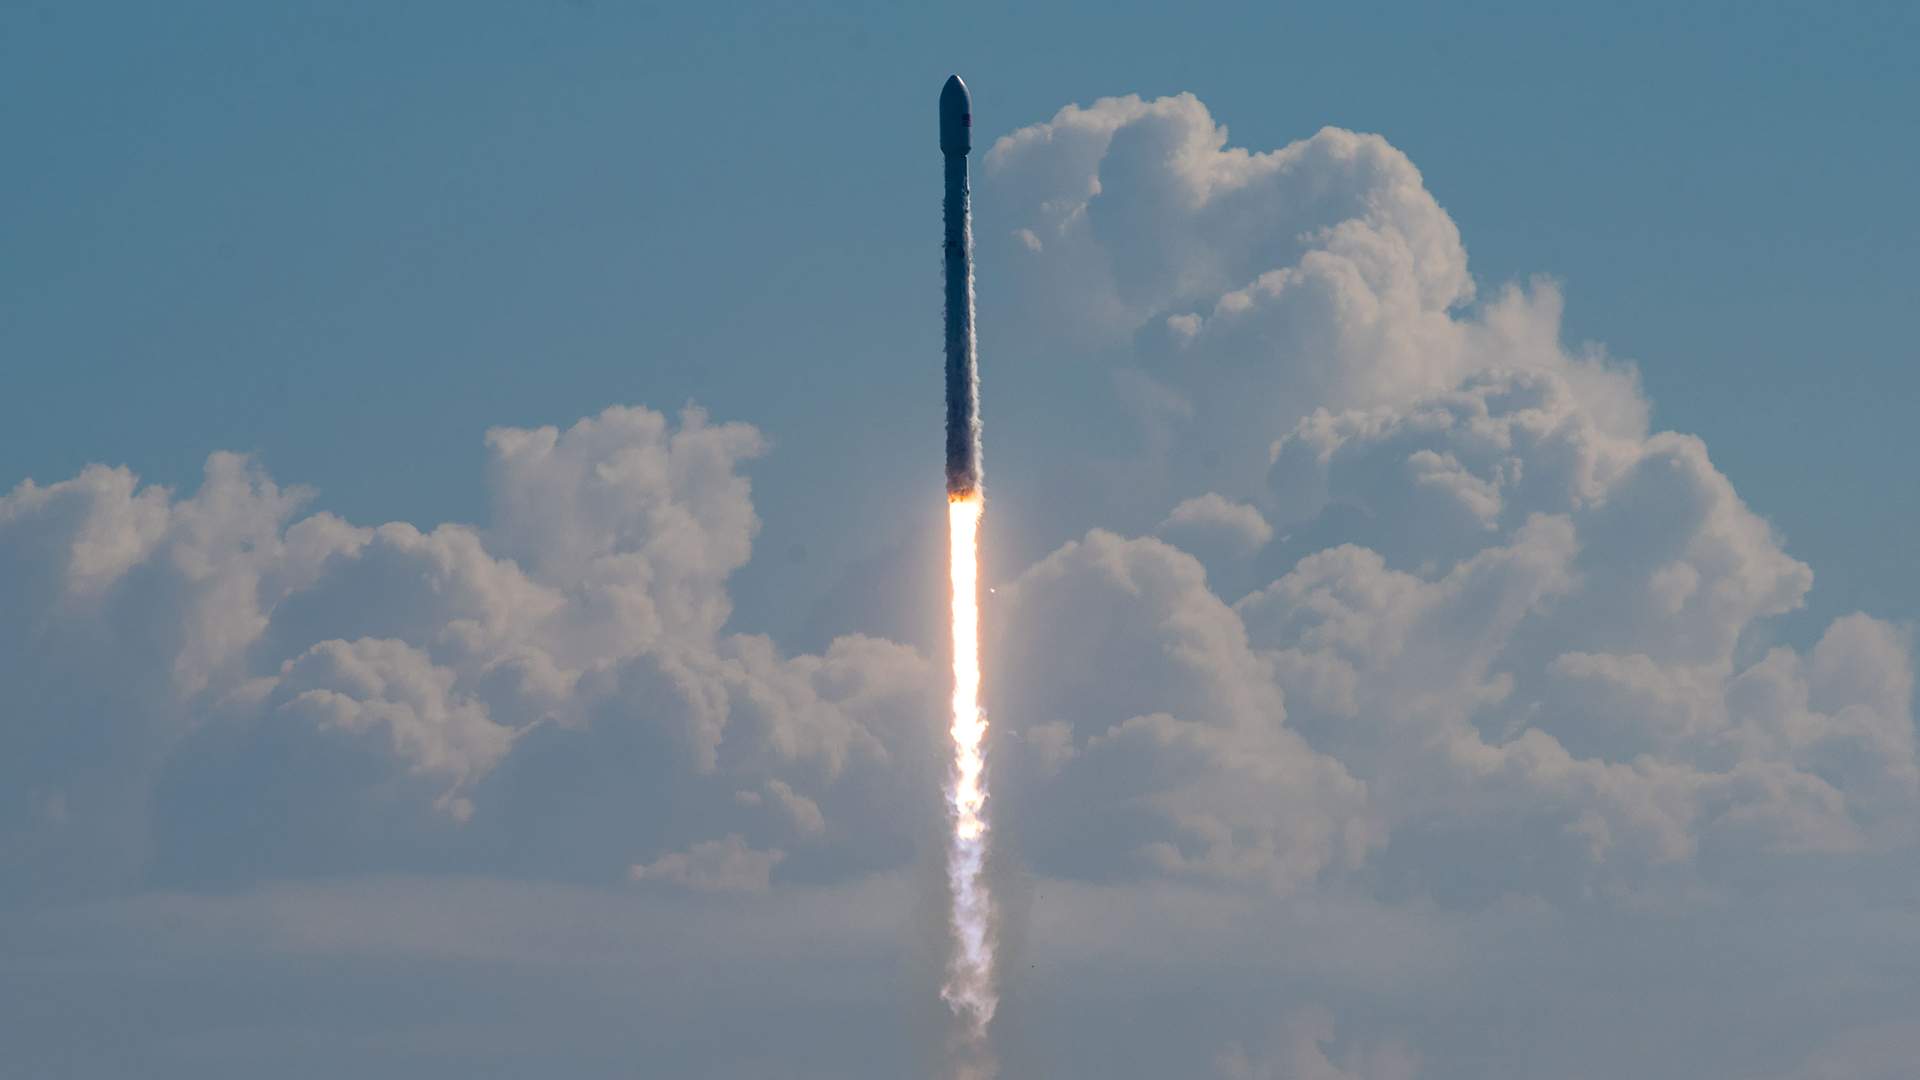 Elon Musk Wants to Make Fast, Affordable, Around-the-World Rocket Travel a Reality